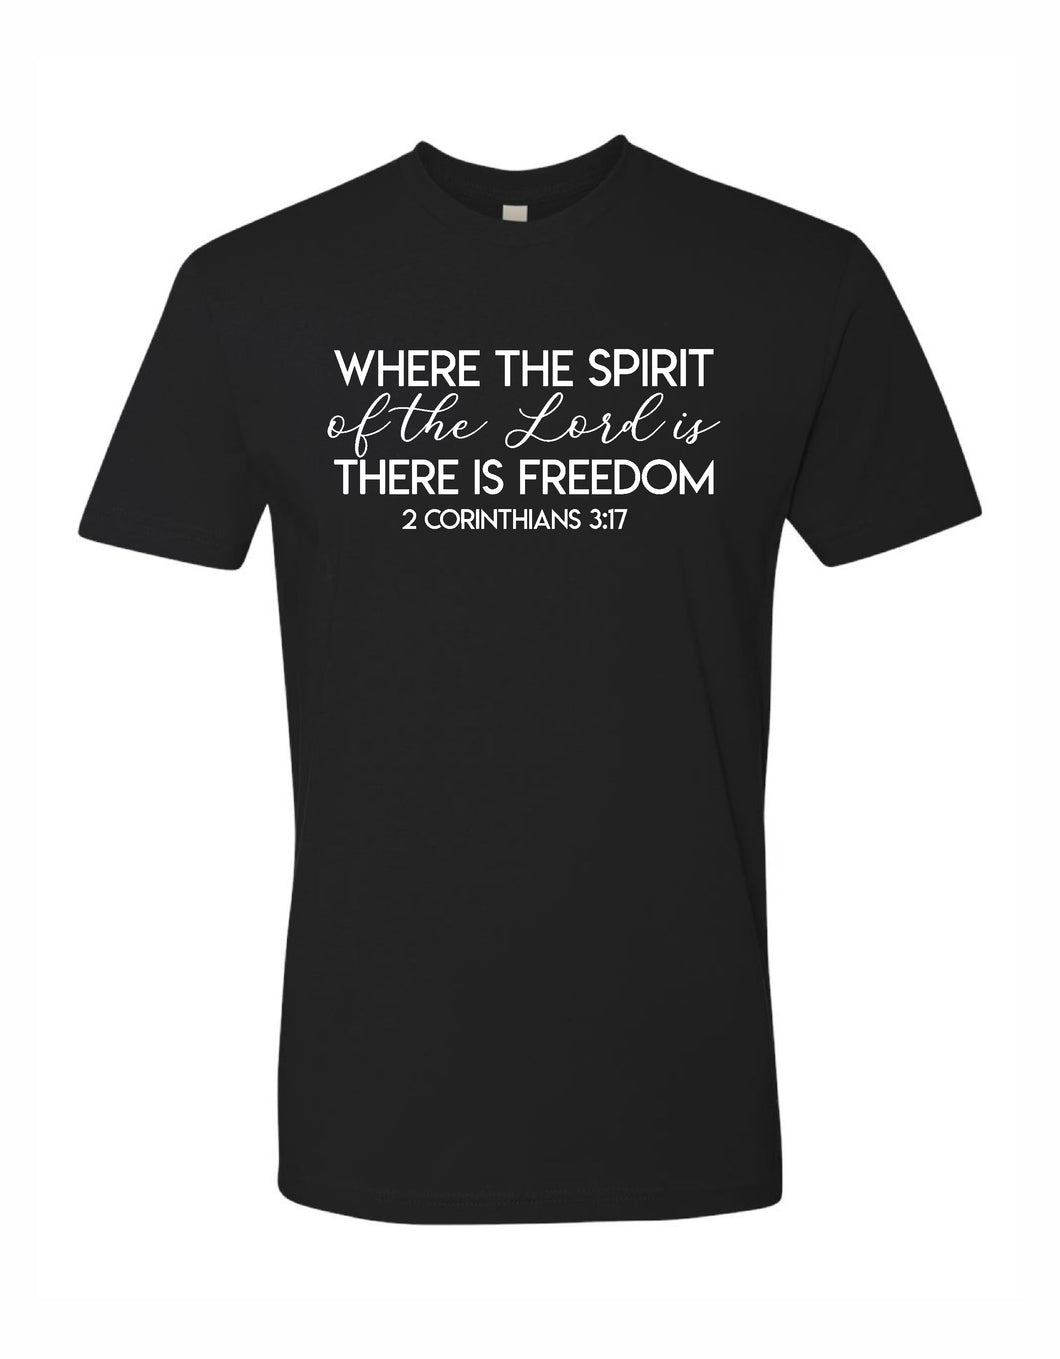 LX-04 Lexit Faith Where the Sprit of the Lord is, there is Freedom 2 Corinthians 3:17 Shirt